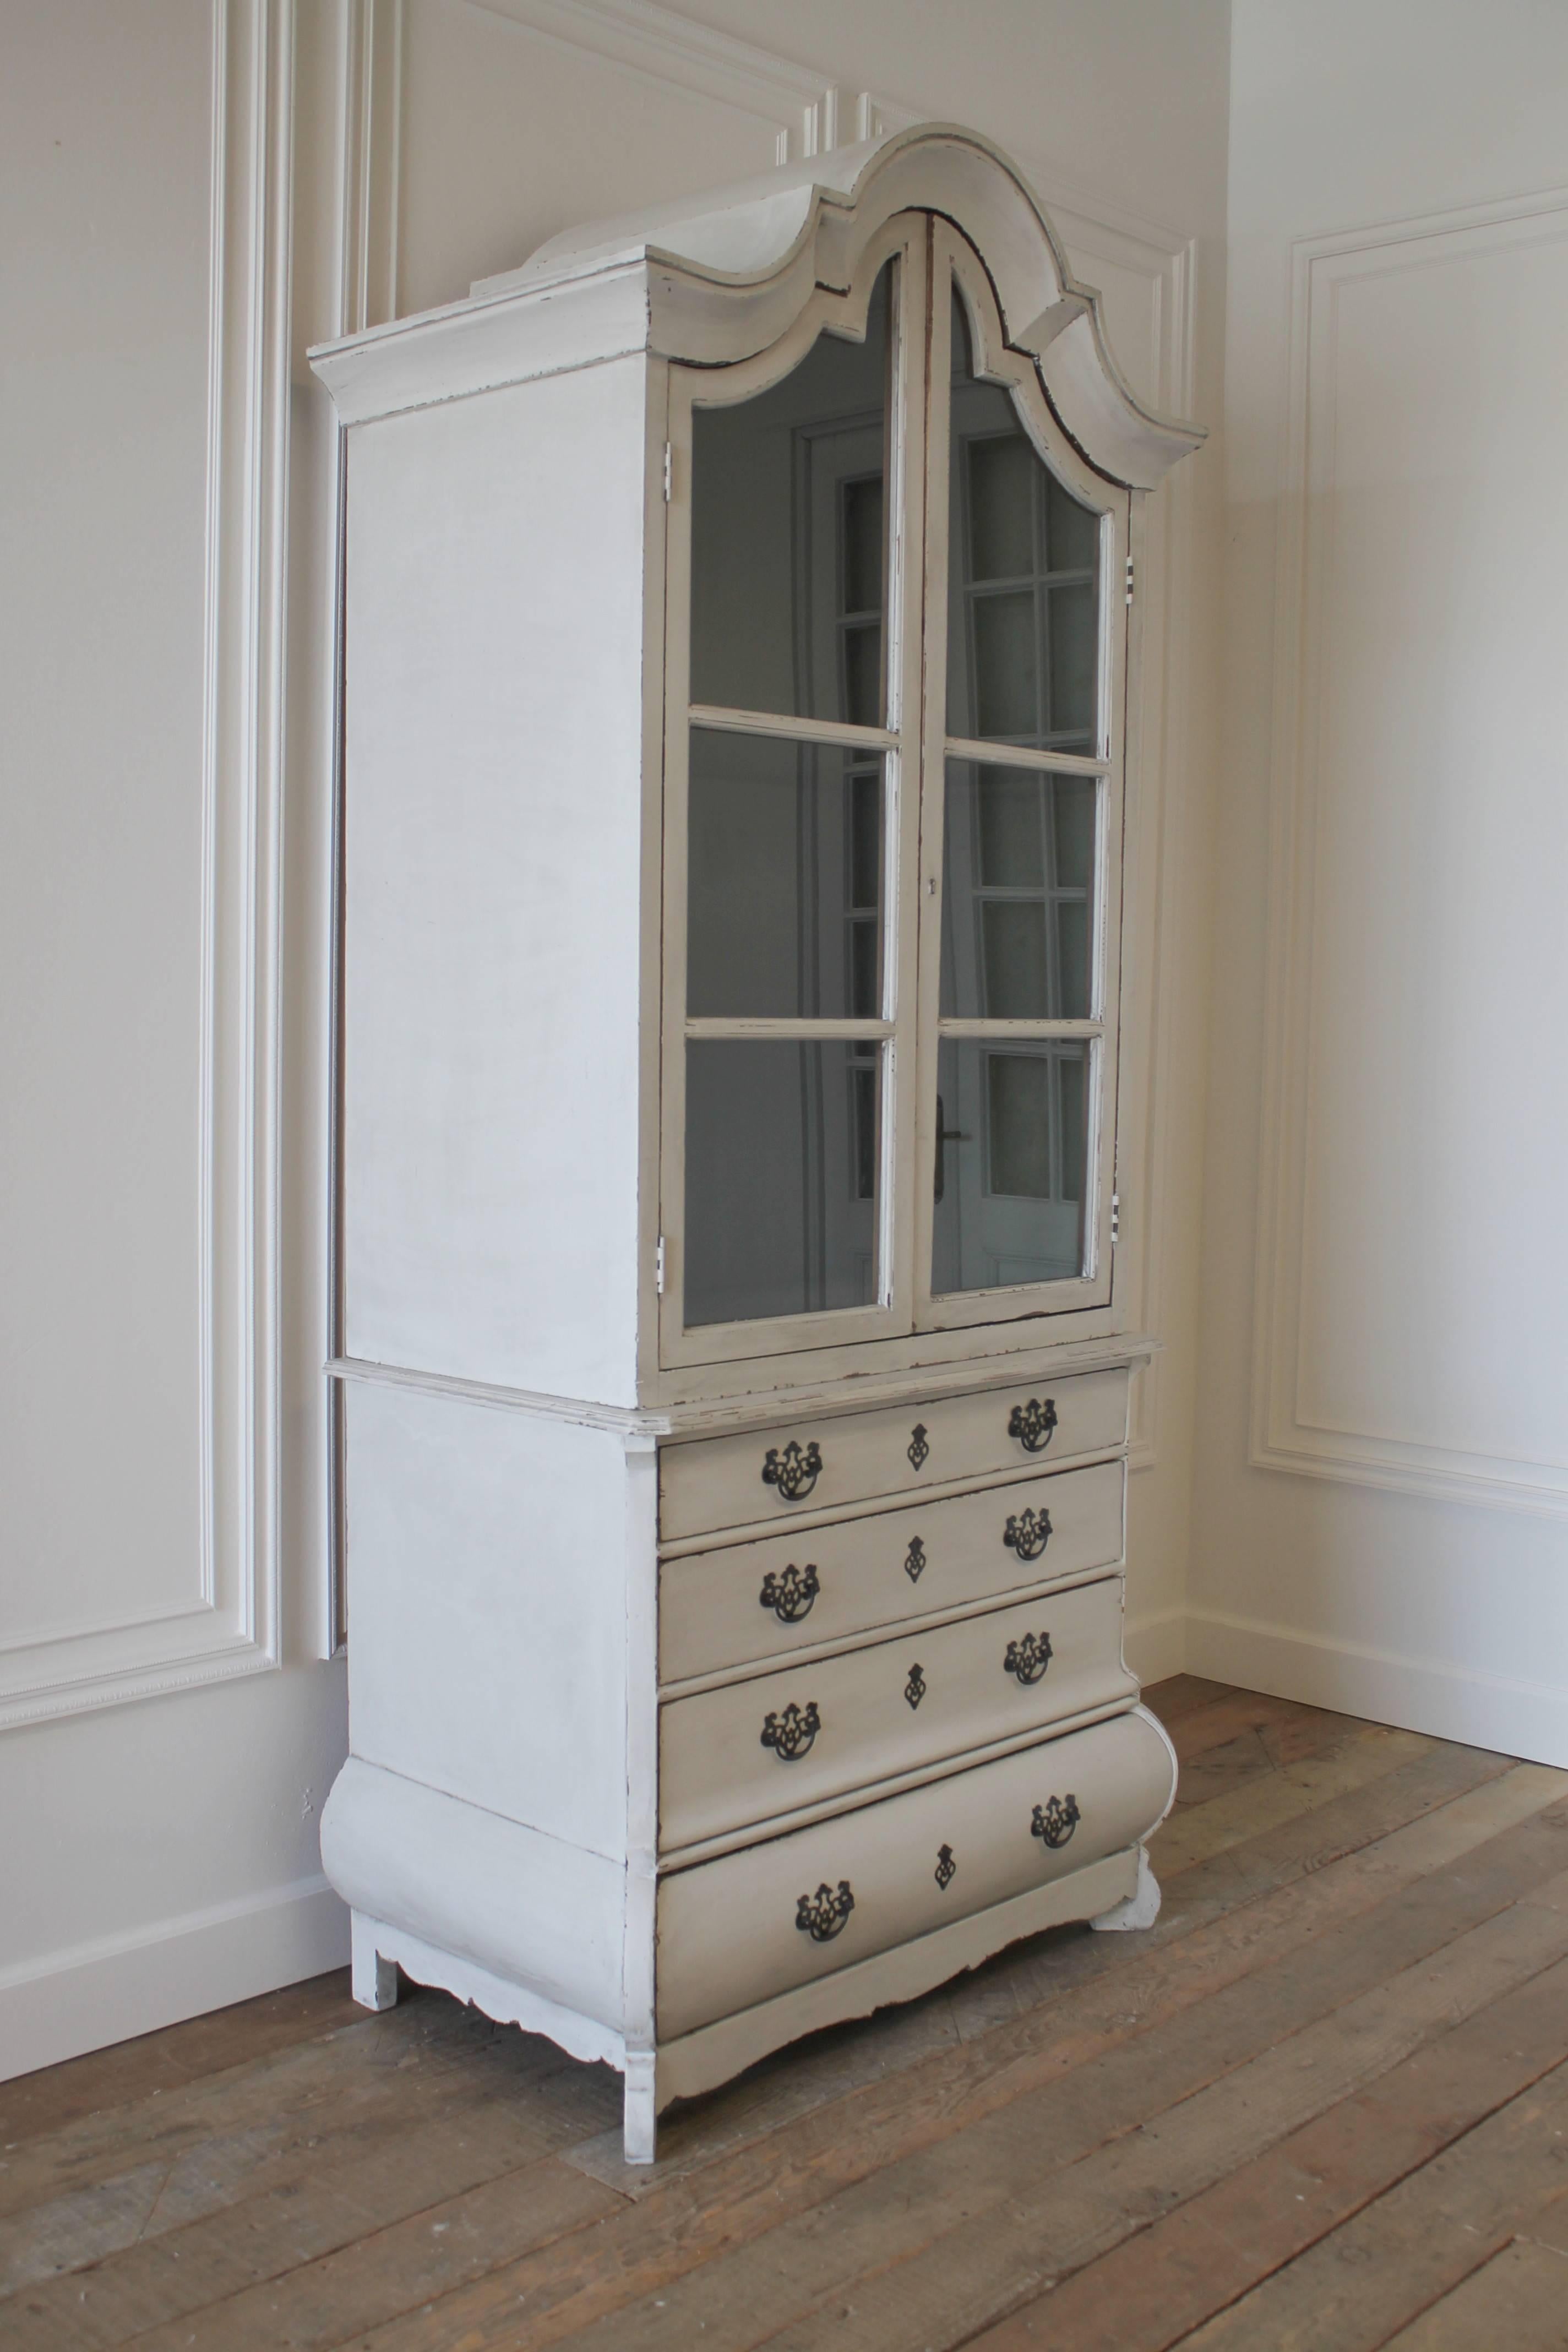 Beautiful designer display in the Italian style. Solid pine, painted in a soft oyster finish, with faux glaze. The finish has the appearance of a time worn patina. The commode bottom has solid pine drawers with a dovetail finish. The drawers all